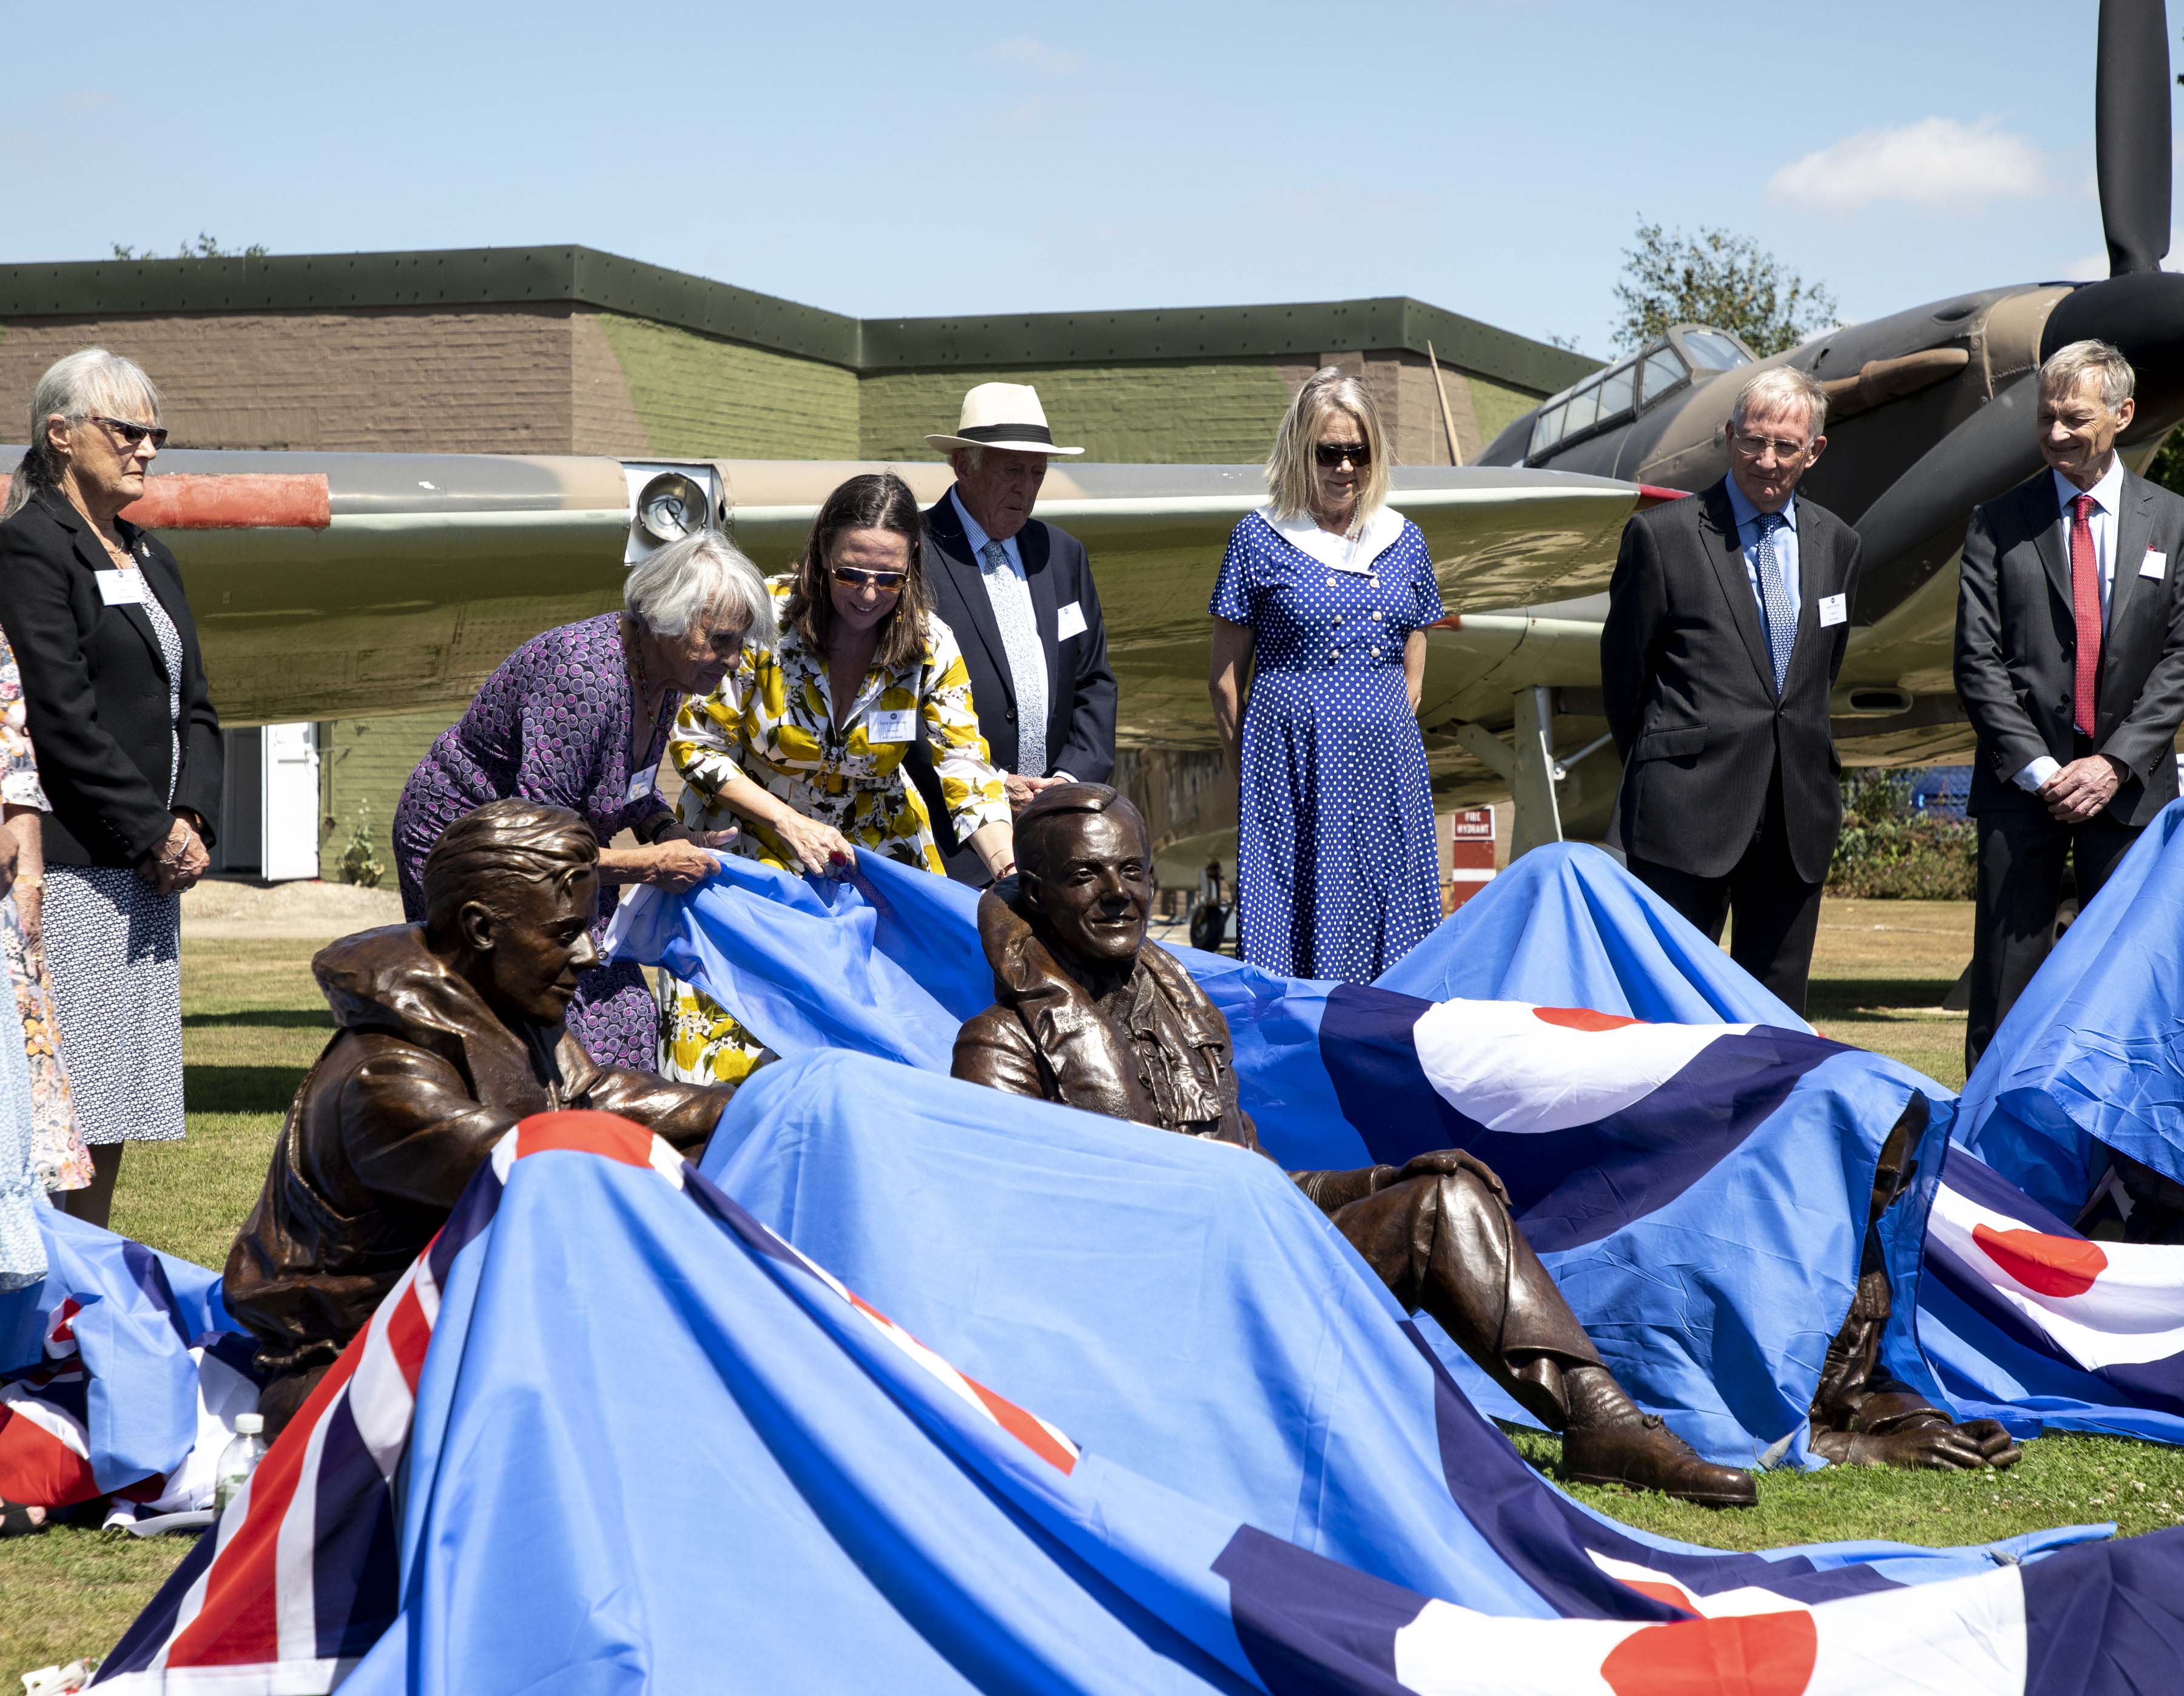 Image shows aviators and members of the public with the bronze sculptures from under blue coverings; with Hurricane aircraft in the background.